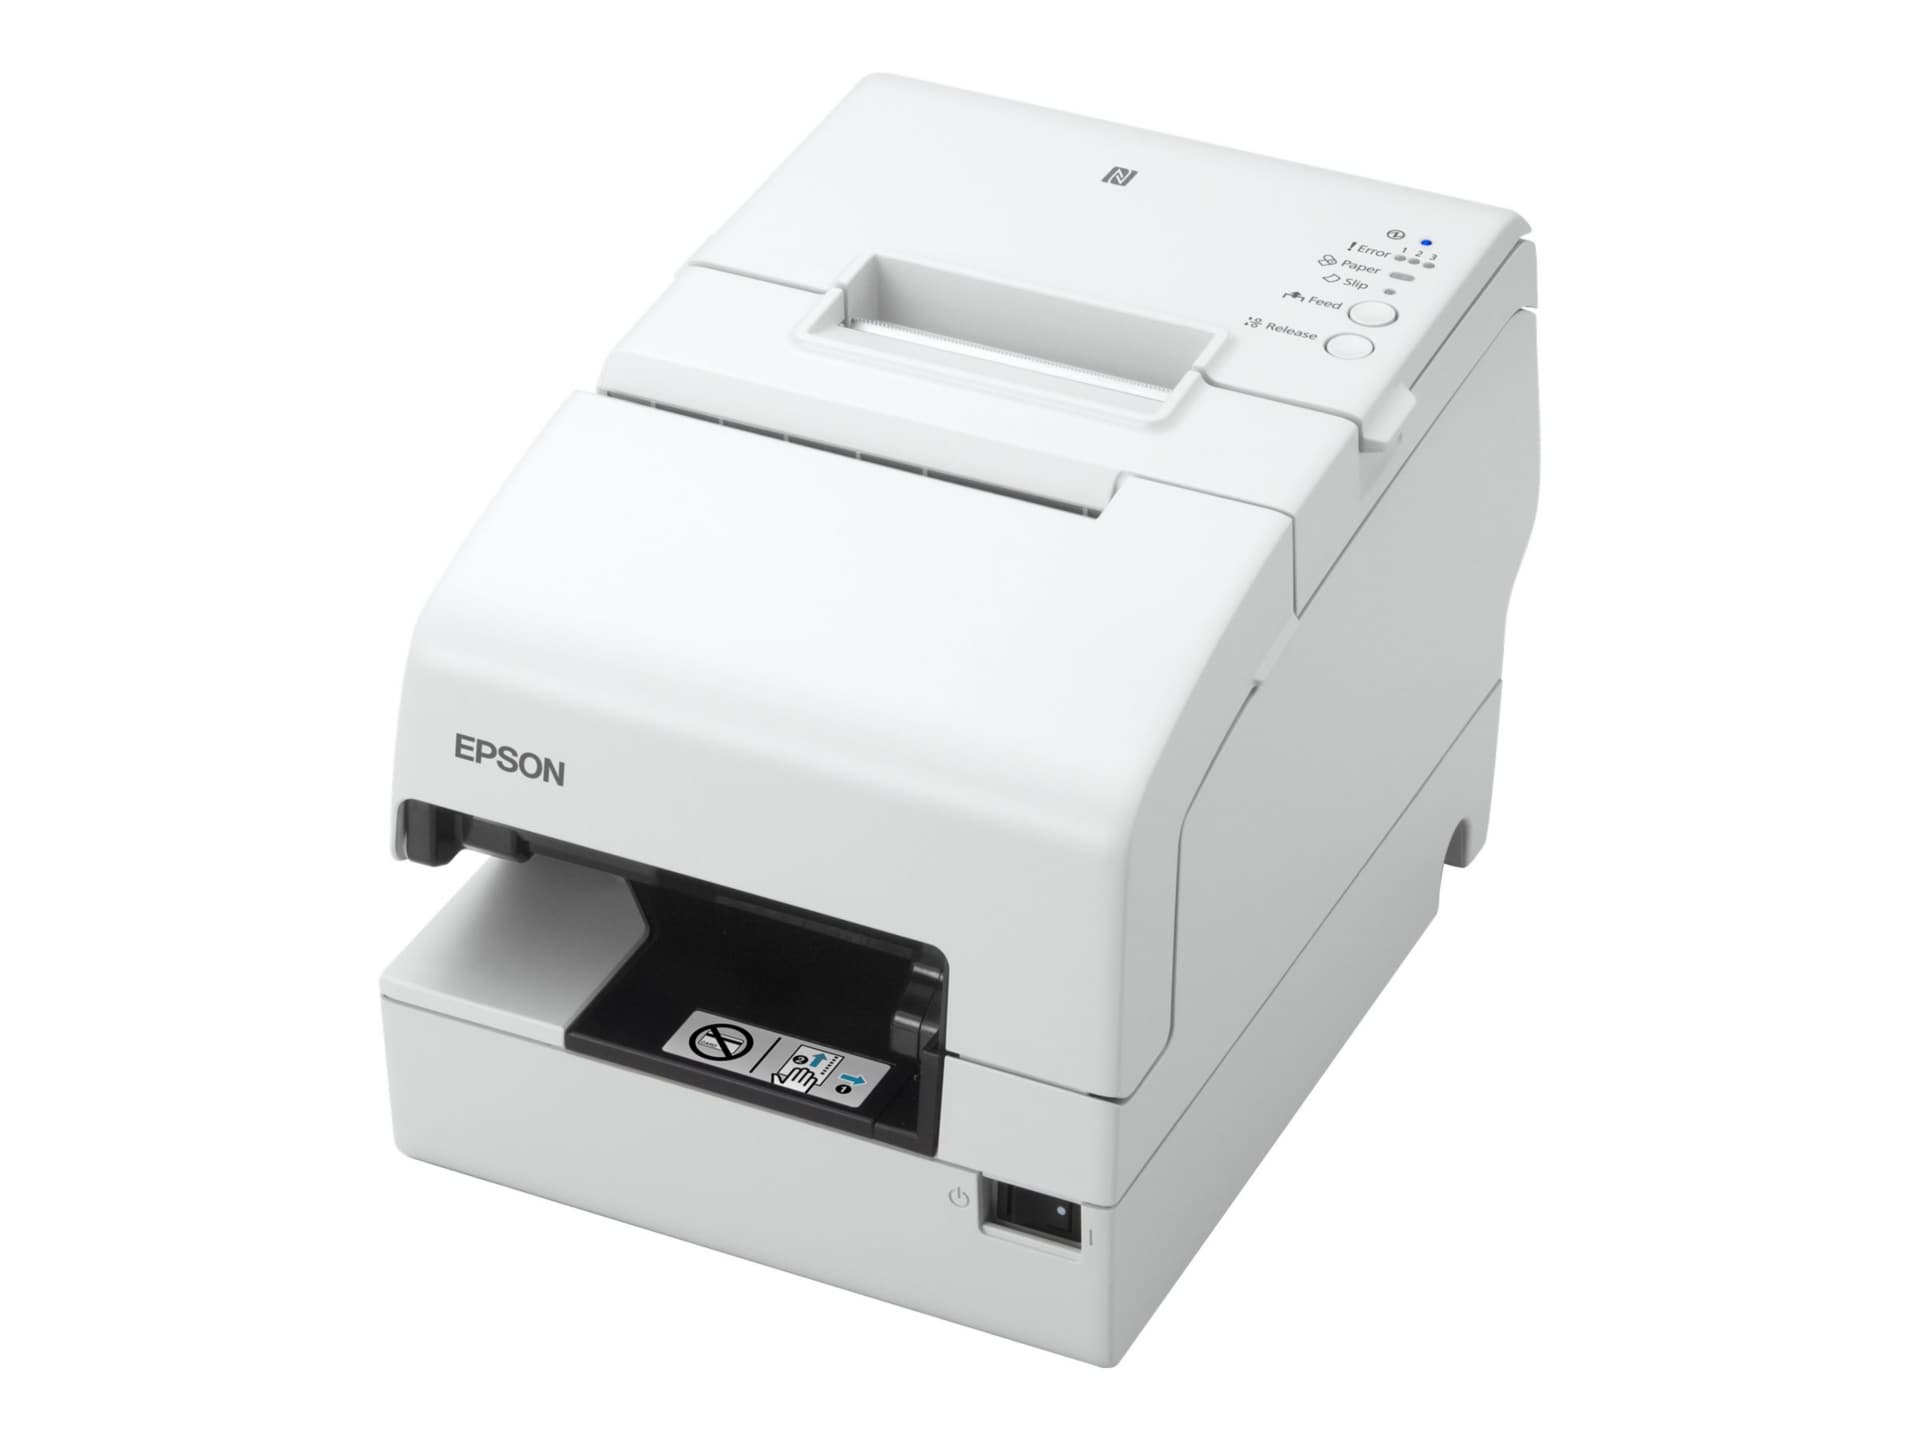 HP TM-H6000V Mobile Direct Thermal Printer - Monochrome - Portable - Receipt Print - USB - With Cutter - Black